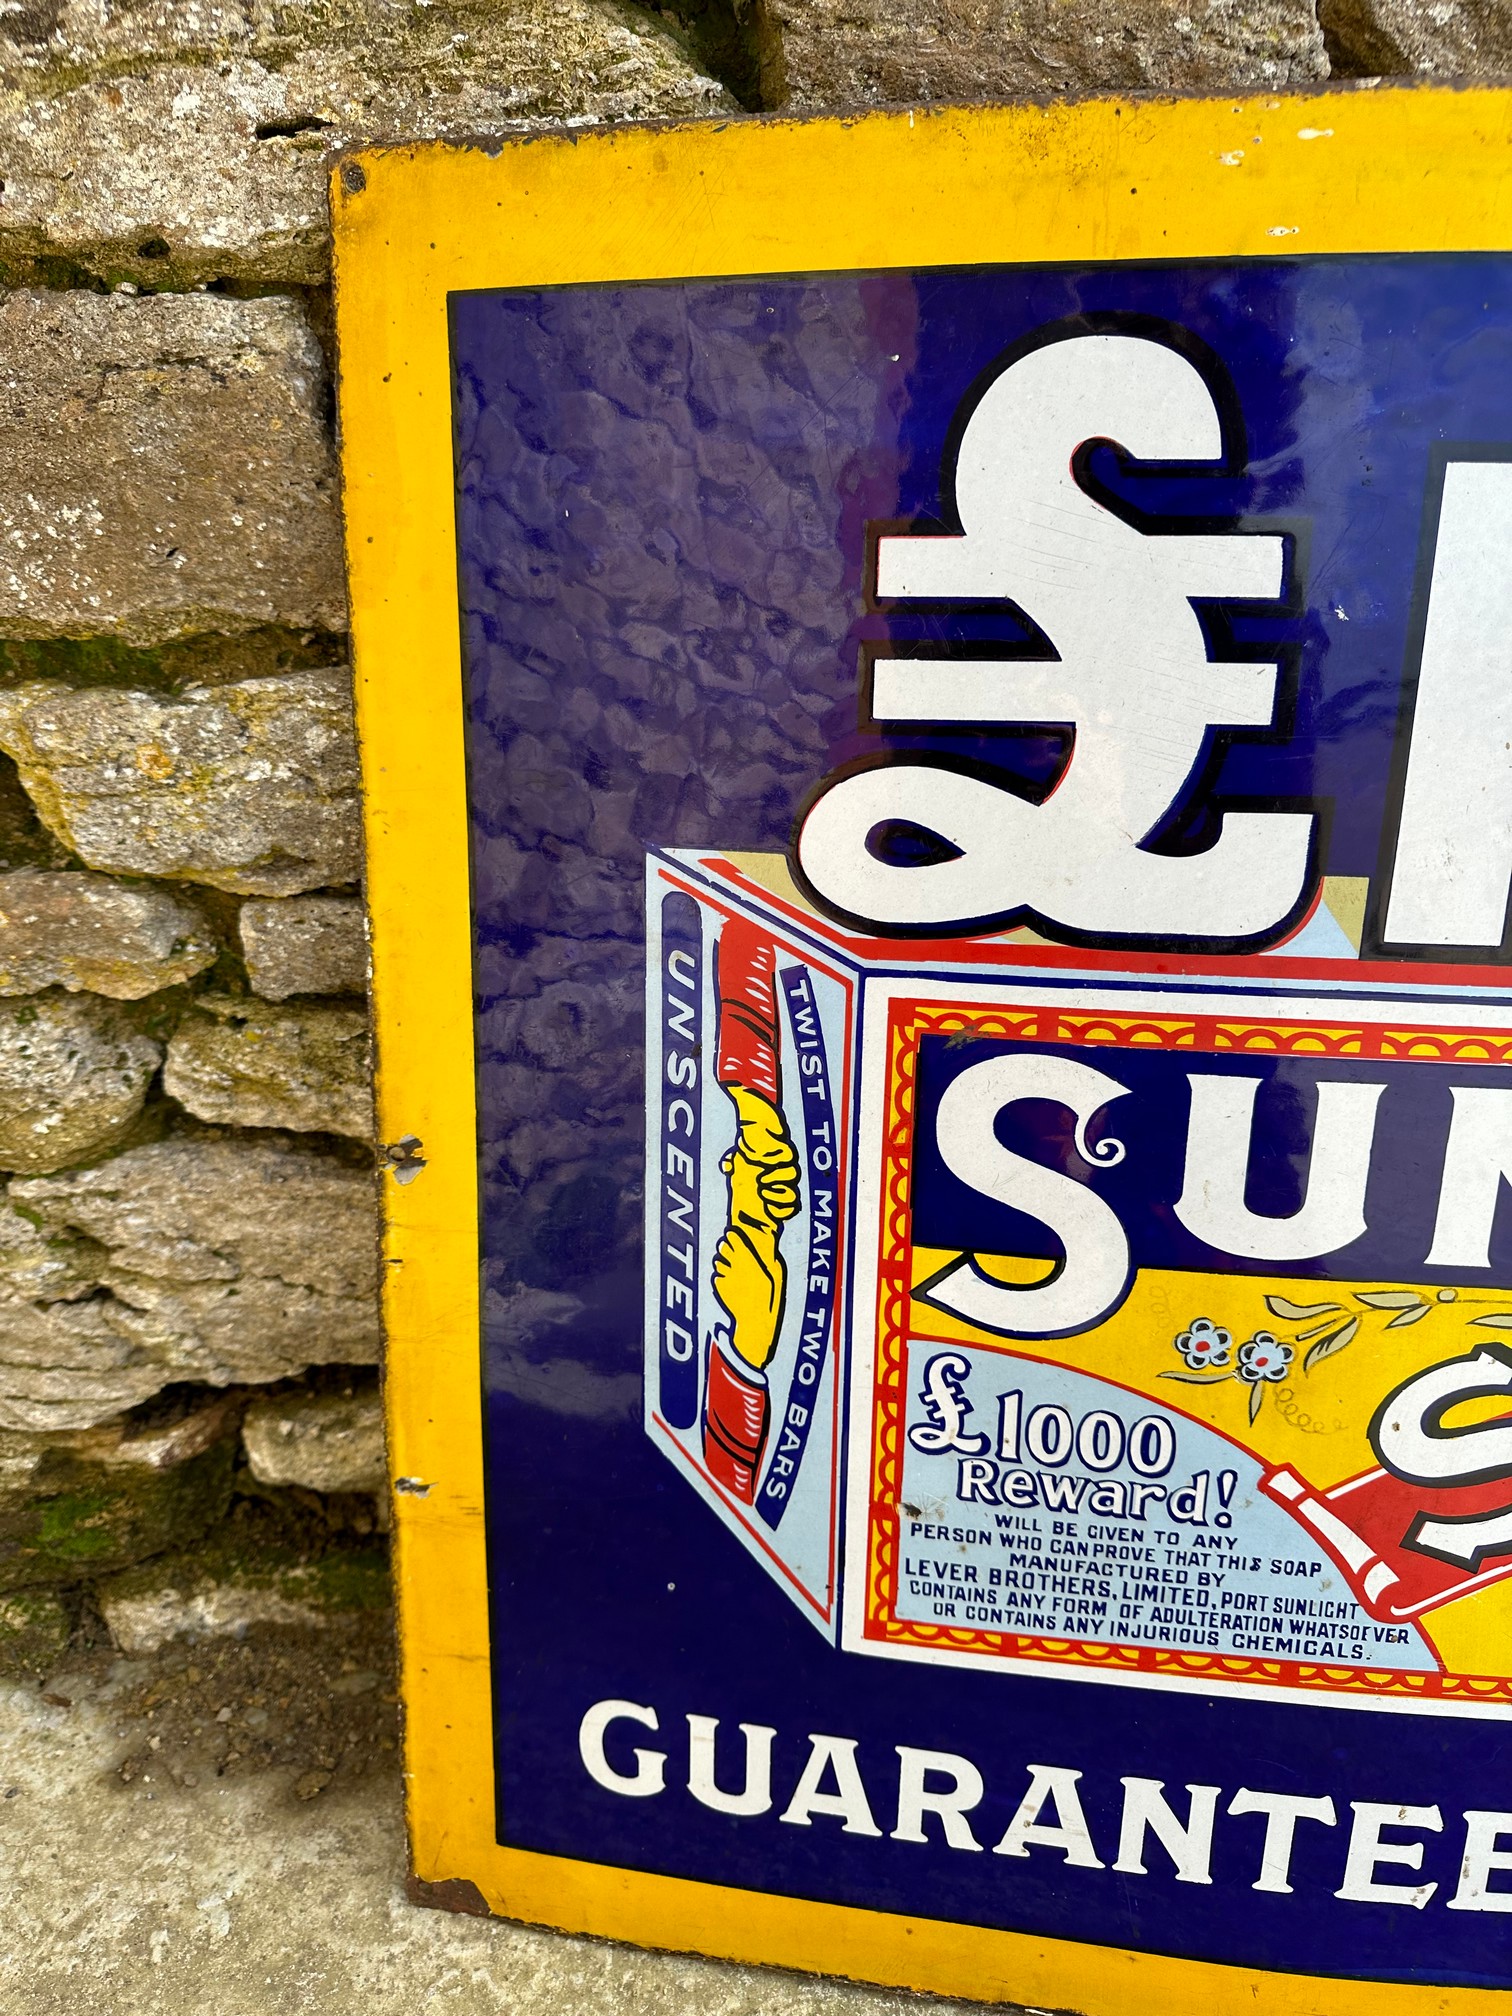 A Sunlight Soap £1,000 Guarantee of Purity pictorial enamel advertising sign, 36 x 27". - Image 3 of 6